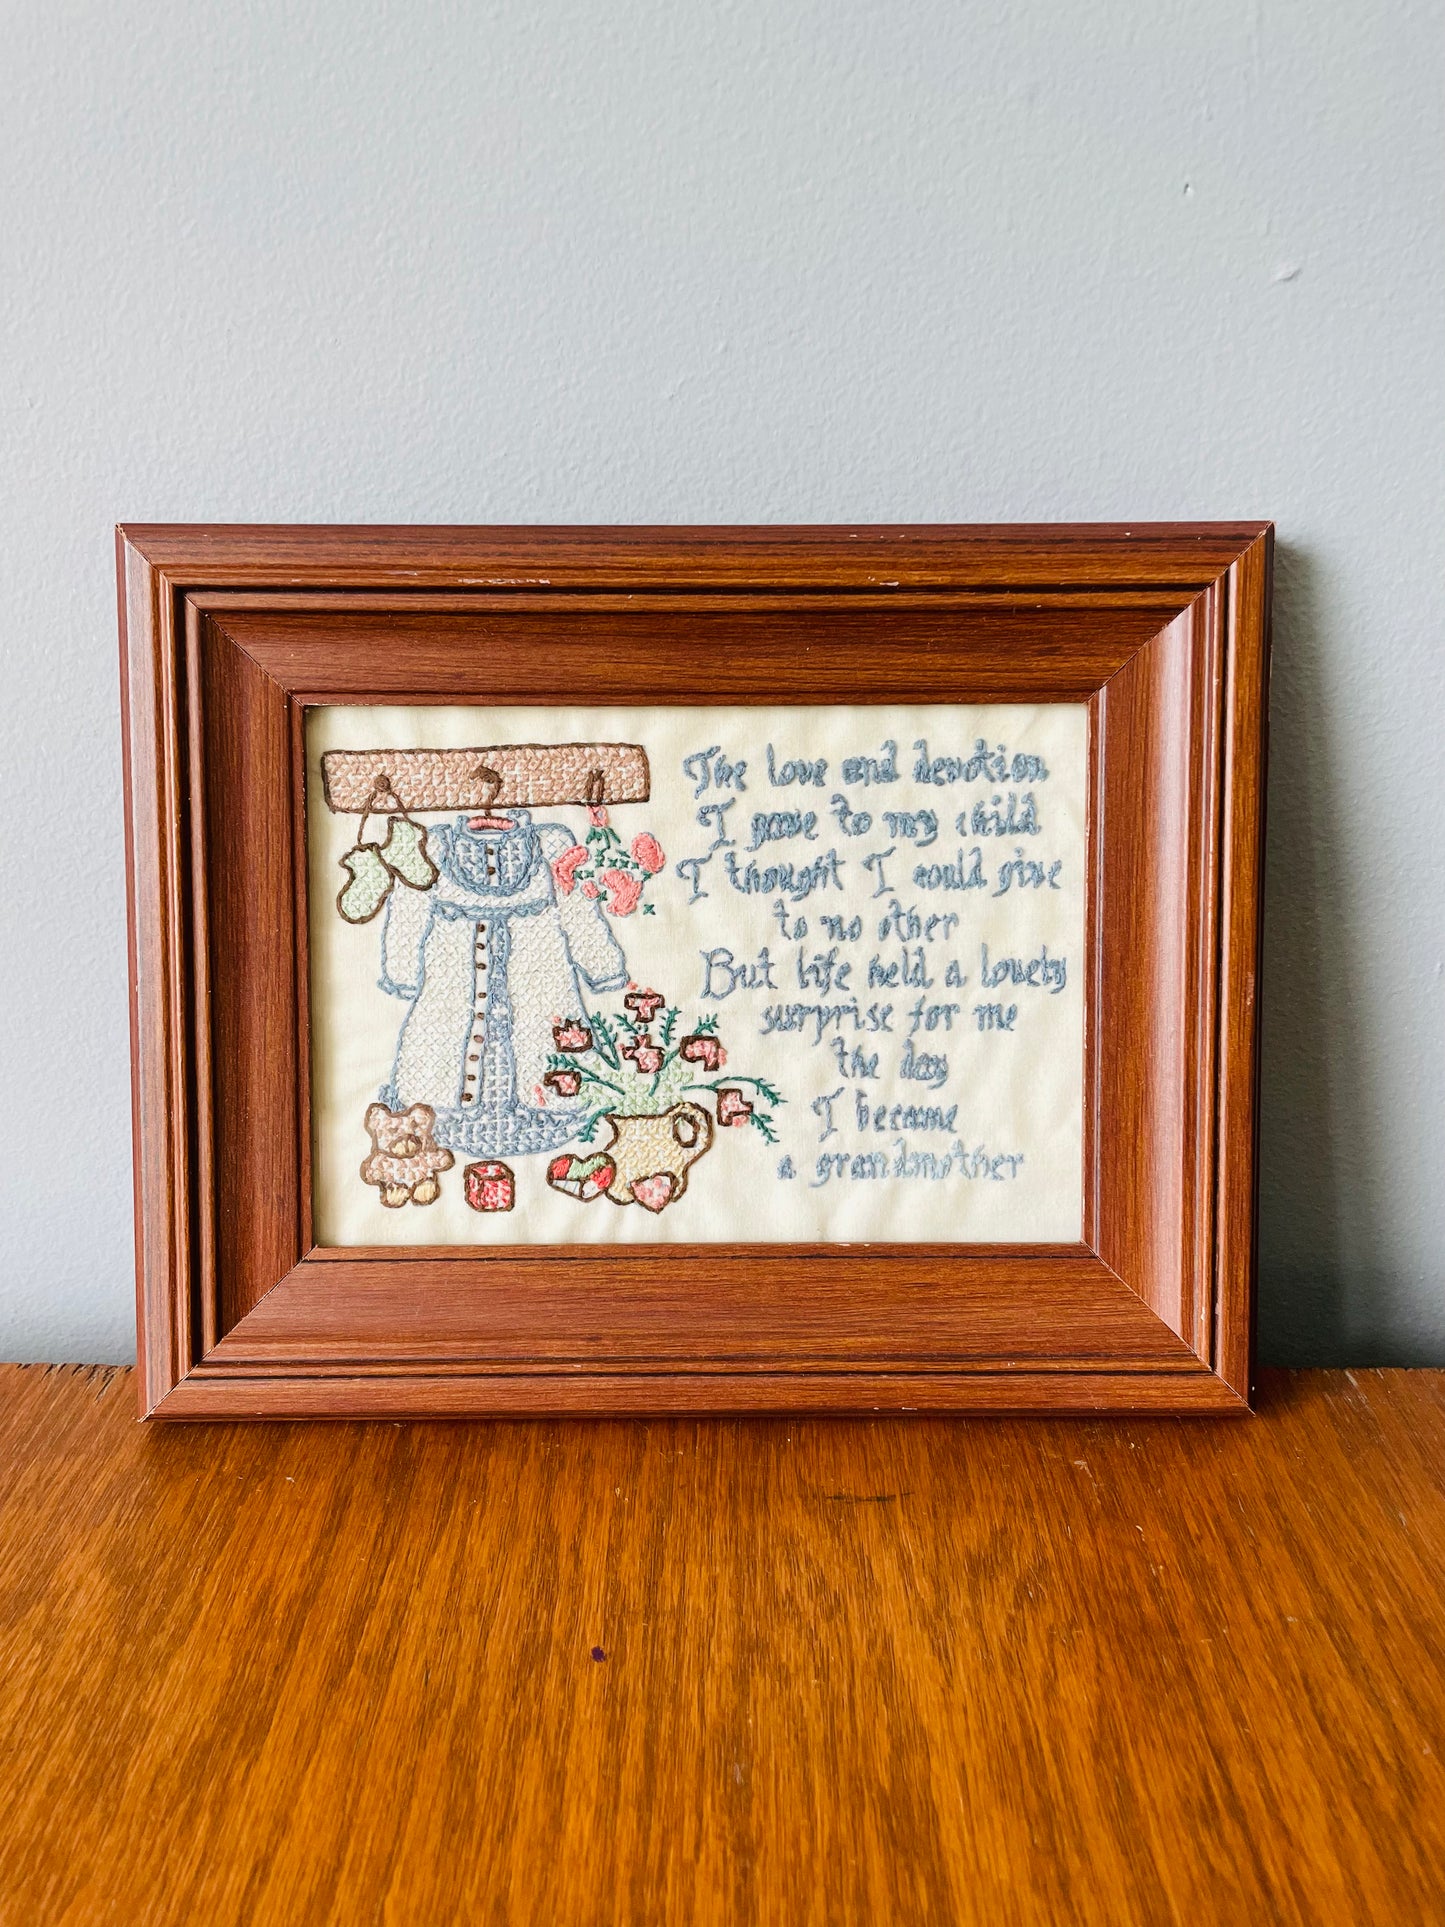 The Sweetest Framed Needlepoint Embroidery Ever - A Message from a Grandmother to a Grandchild